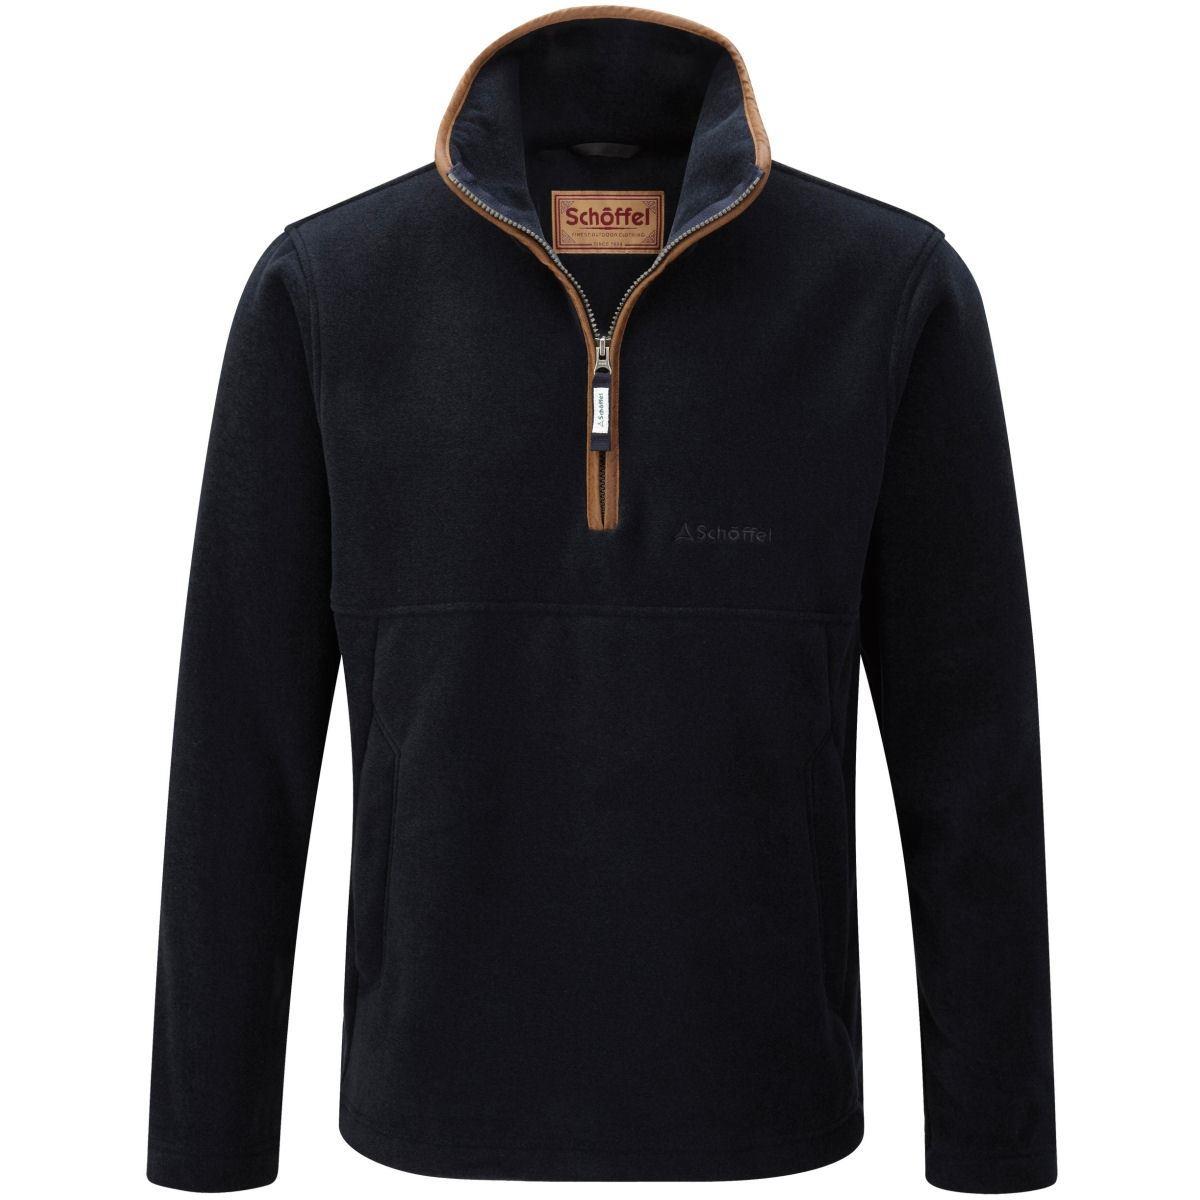 What are the extra specs of the Schoffel quarter zip fleece?